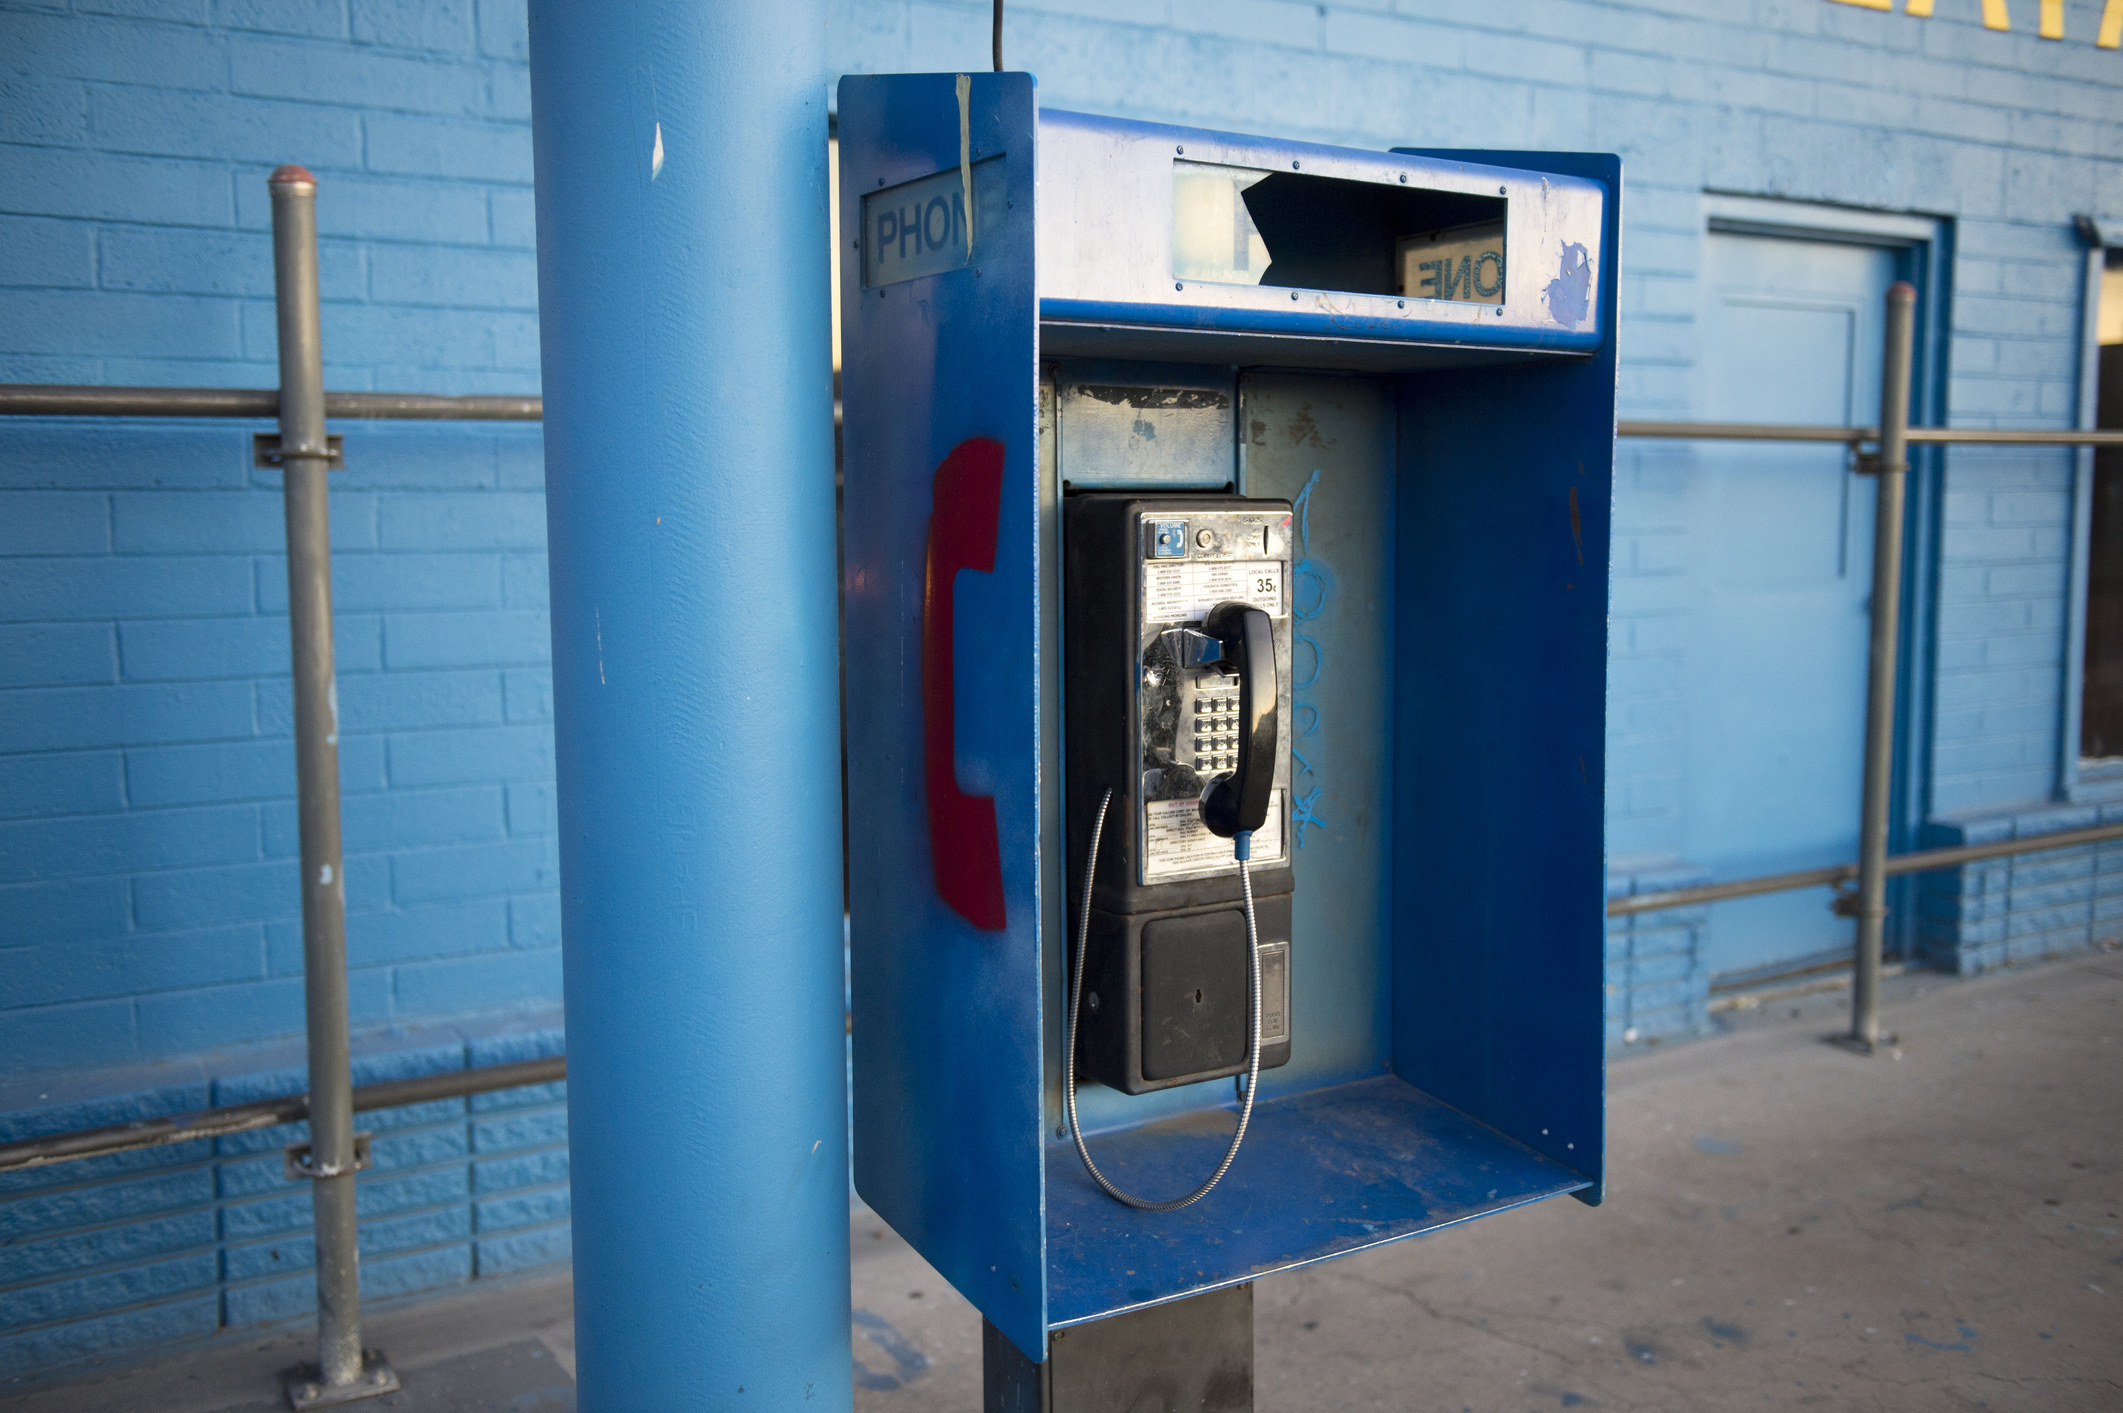 An old pay phone